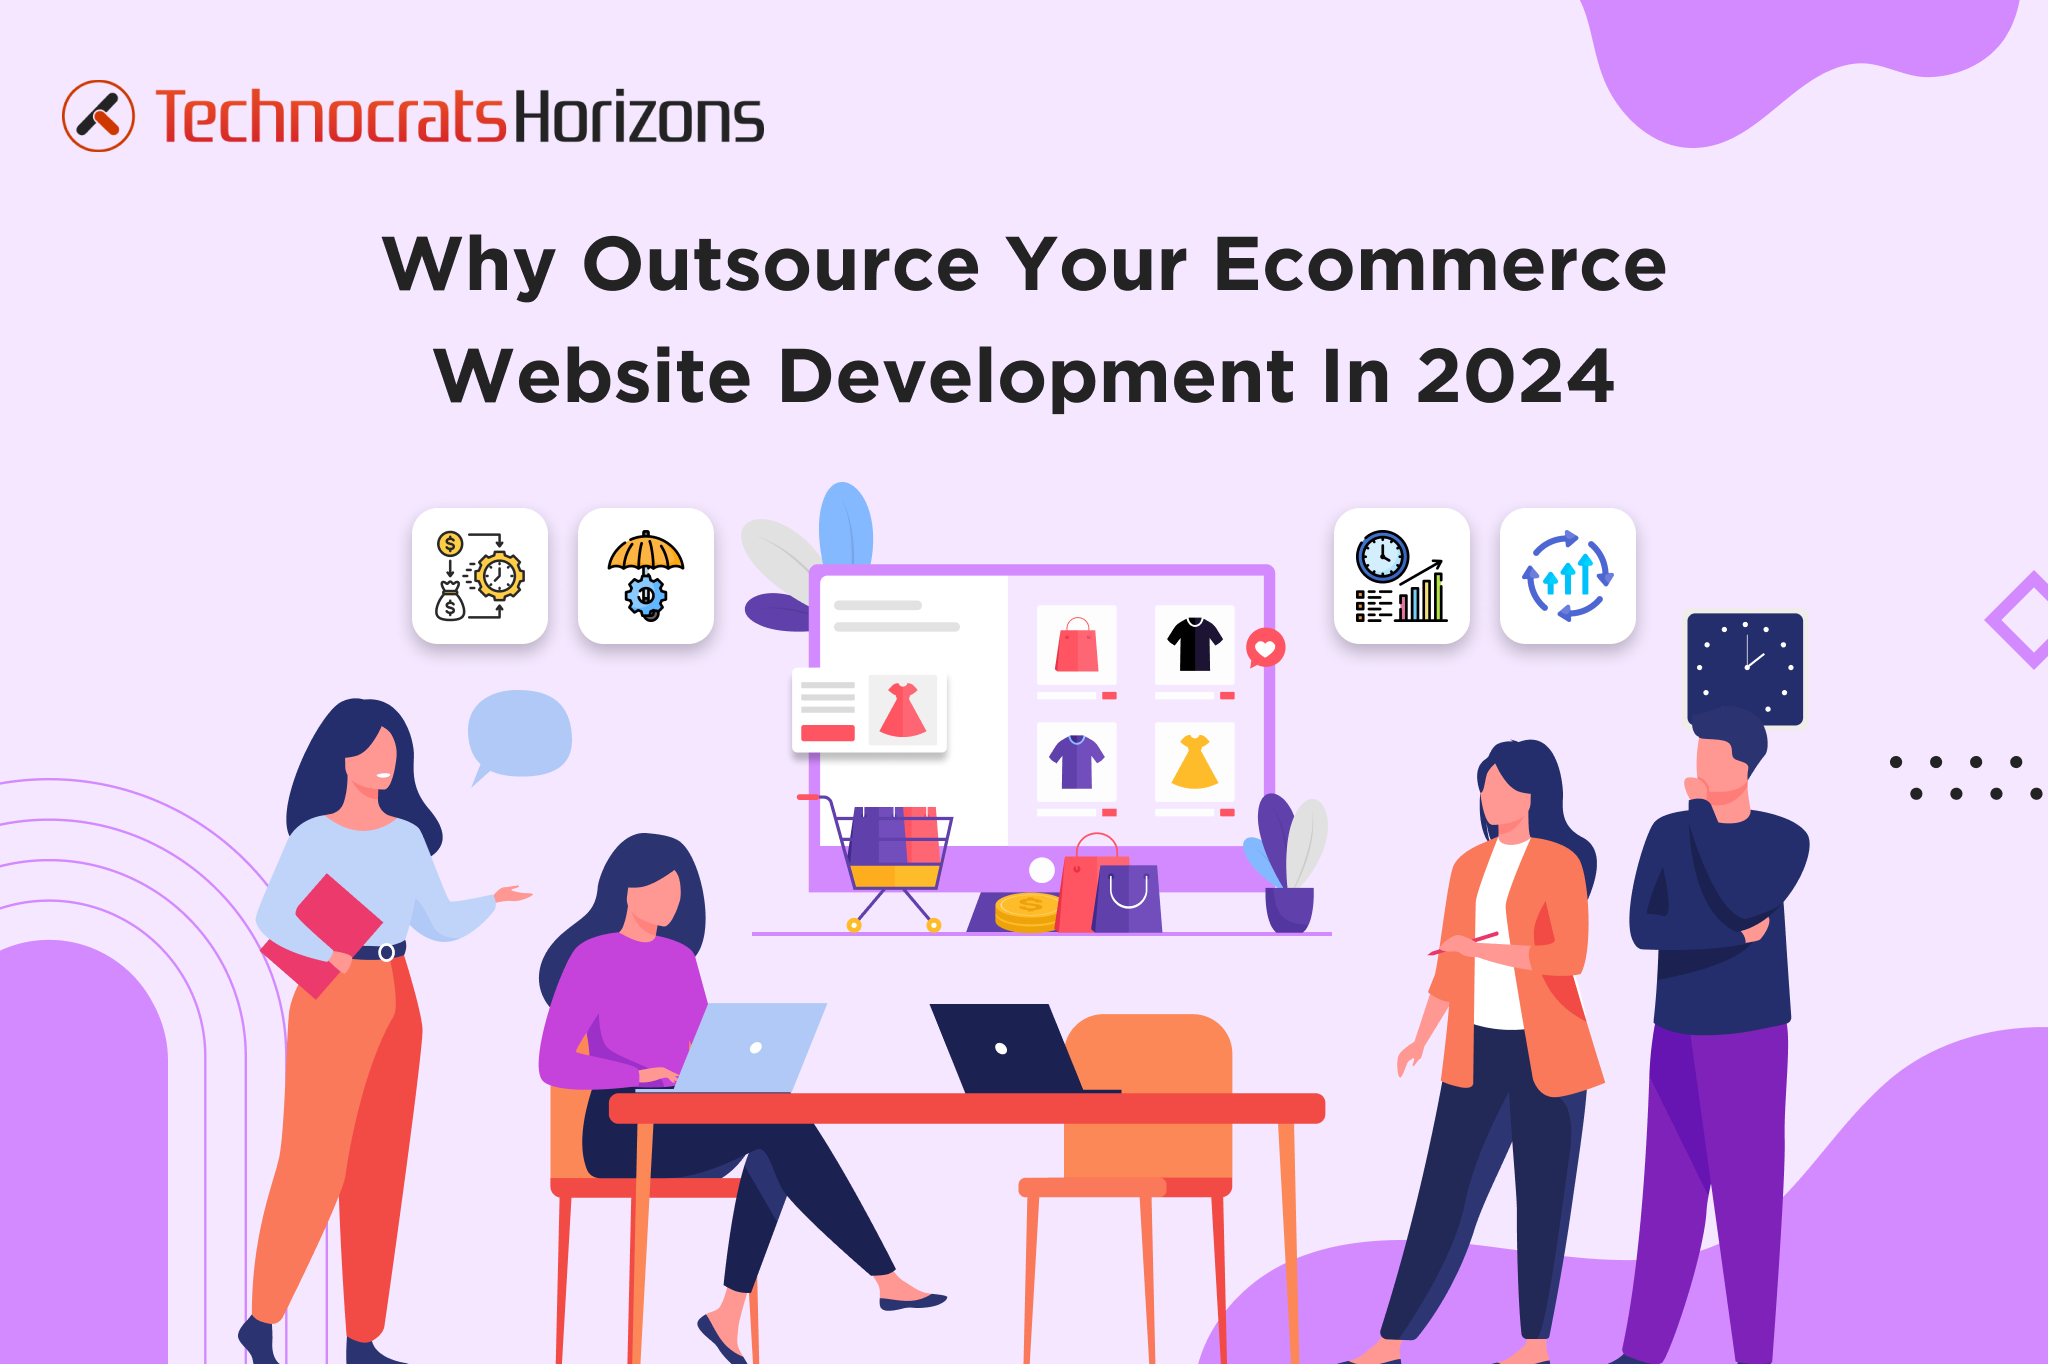 Why You Need To Outsource eCommerce Web Development in 2024